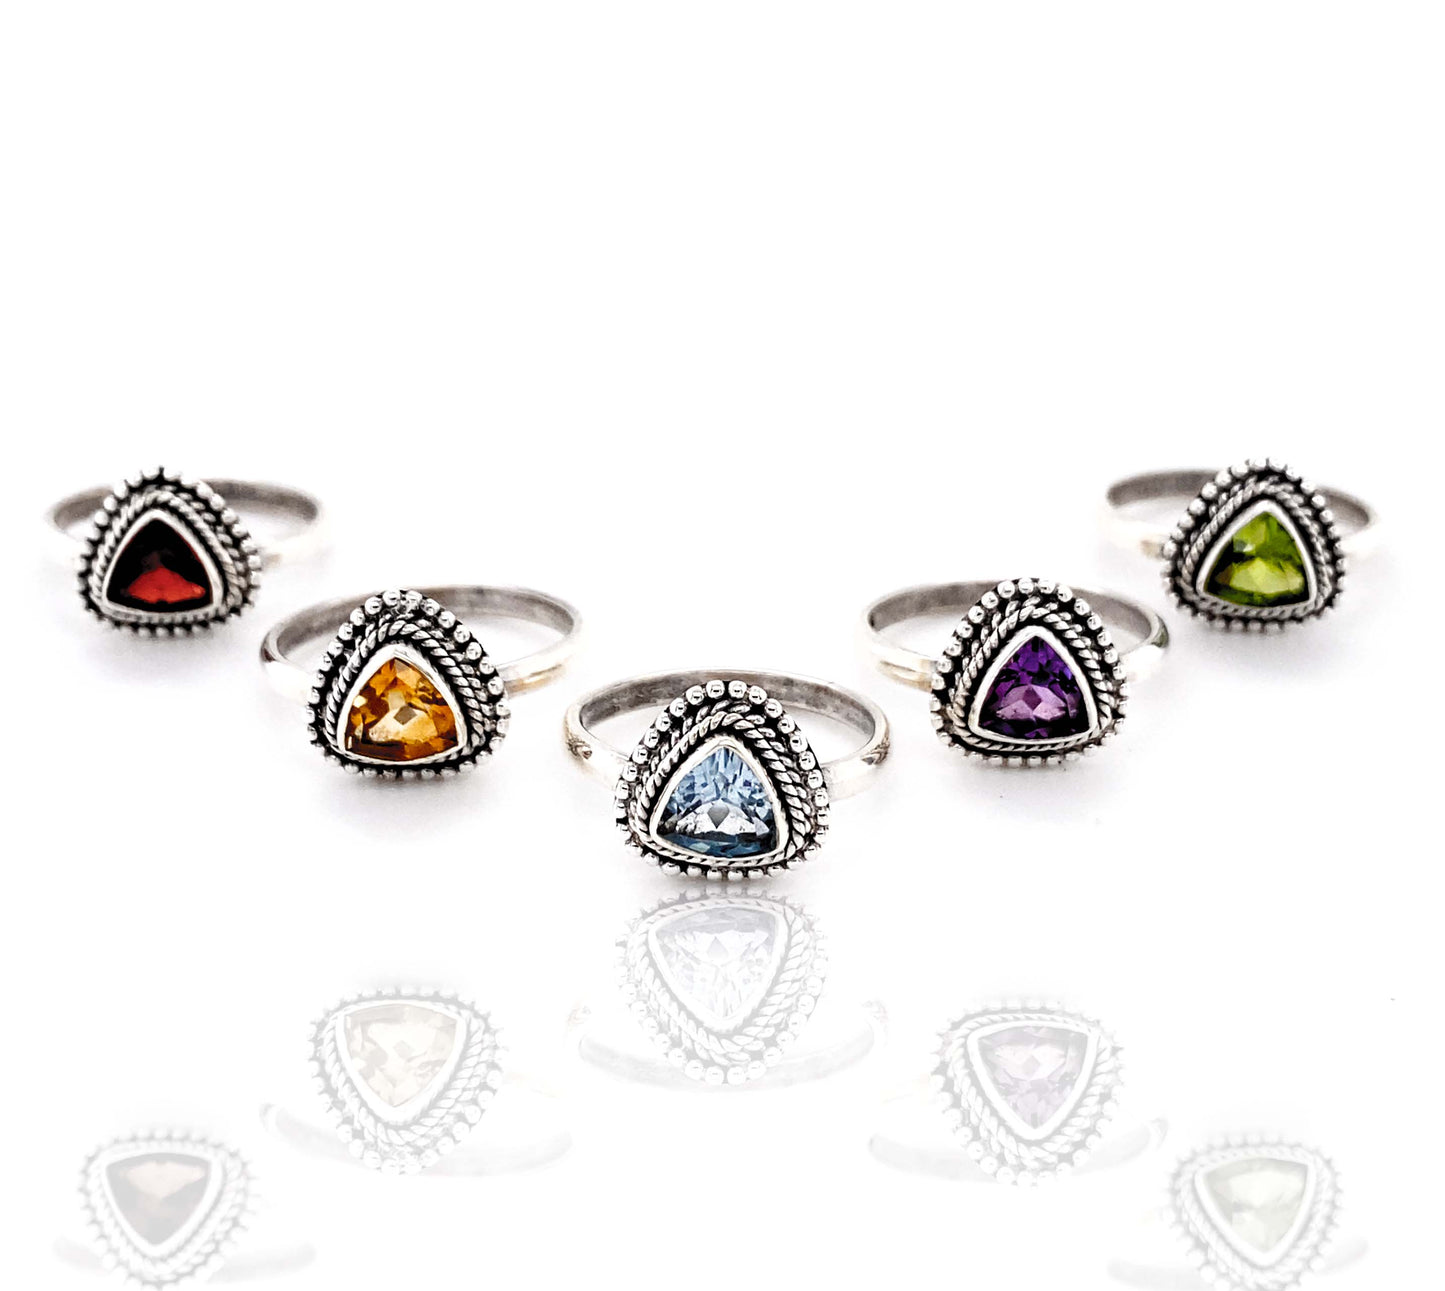 A set of Triangle Gemstone Rings with Rope Border.